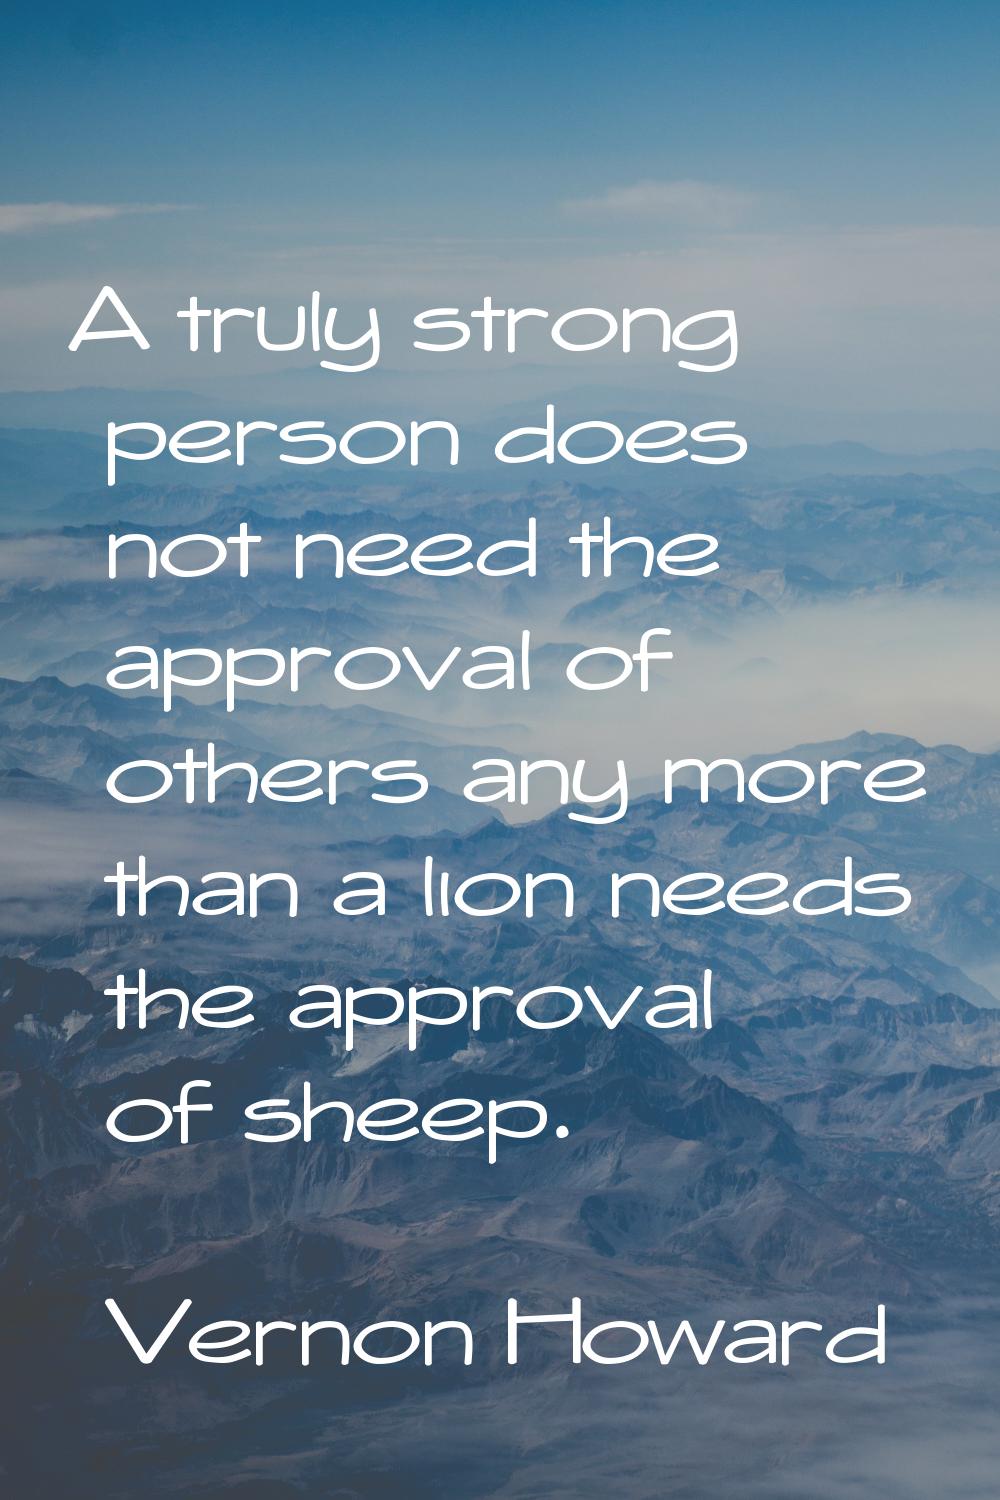 A truly strong person does not need the approval of others any more than a lion needs the approval 